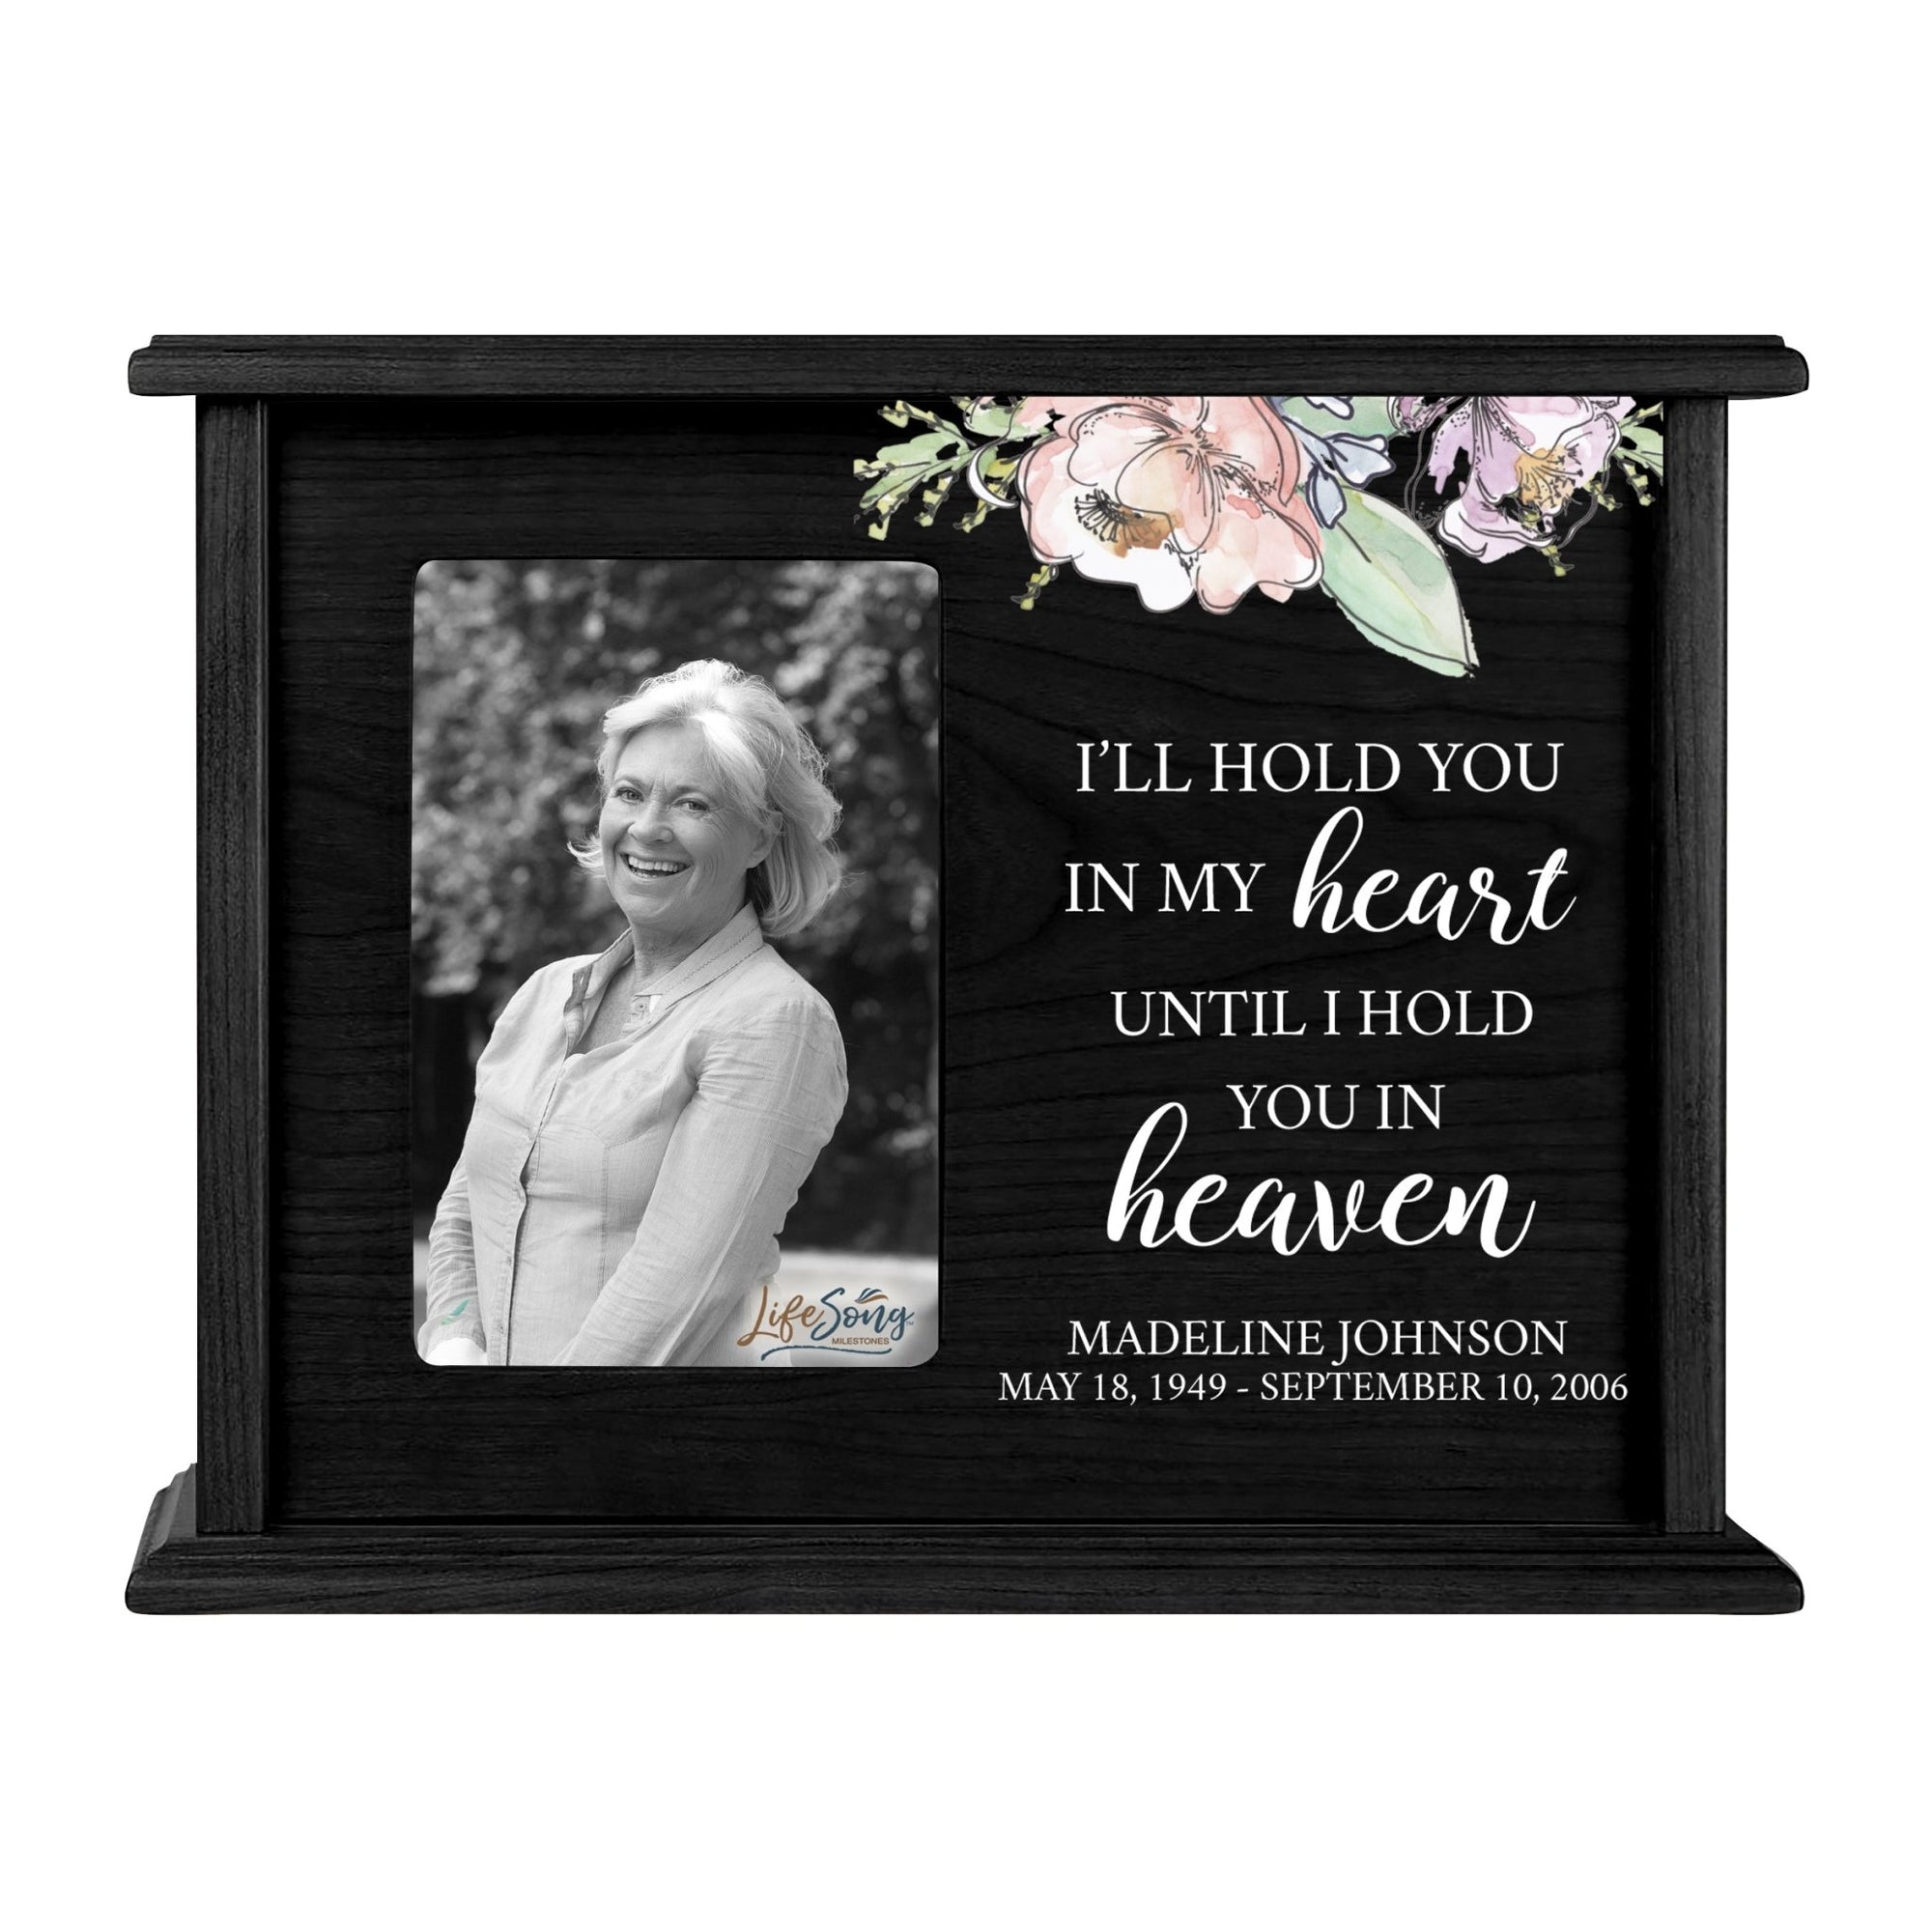 Personalized Memorial Cherry Wood 12 x 4.5 x 9 Cremation Urn Box with Picture Frame holds 200 cu in of Human Ashes and 4x6 Photo - I’ll Hold In My Heart - LifeSong Milestones